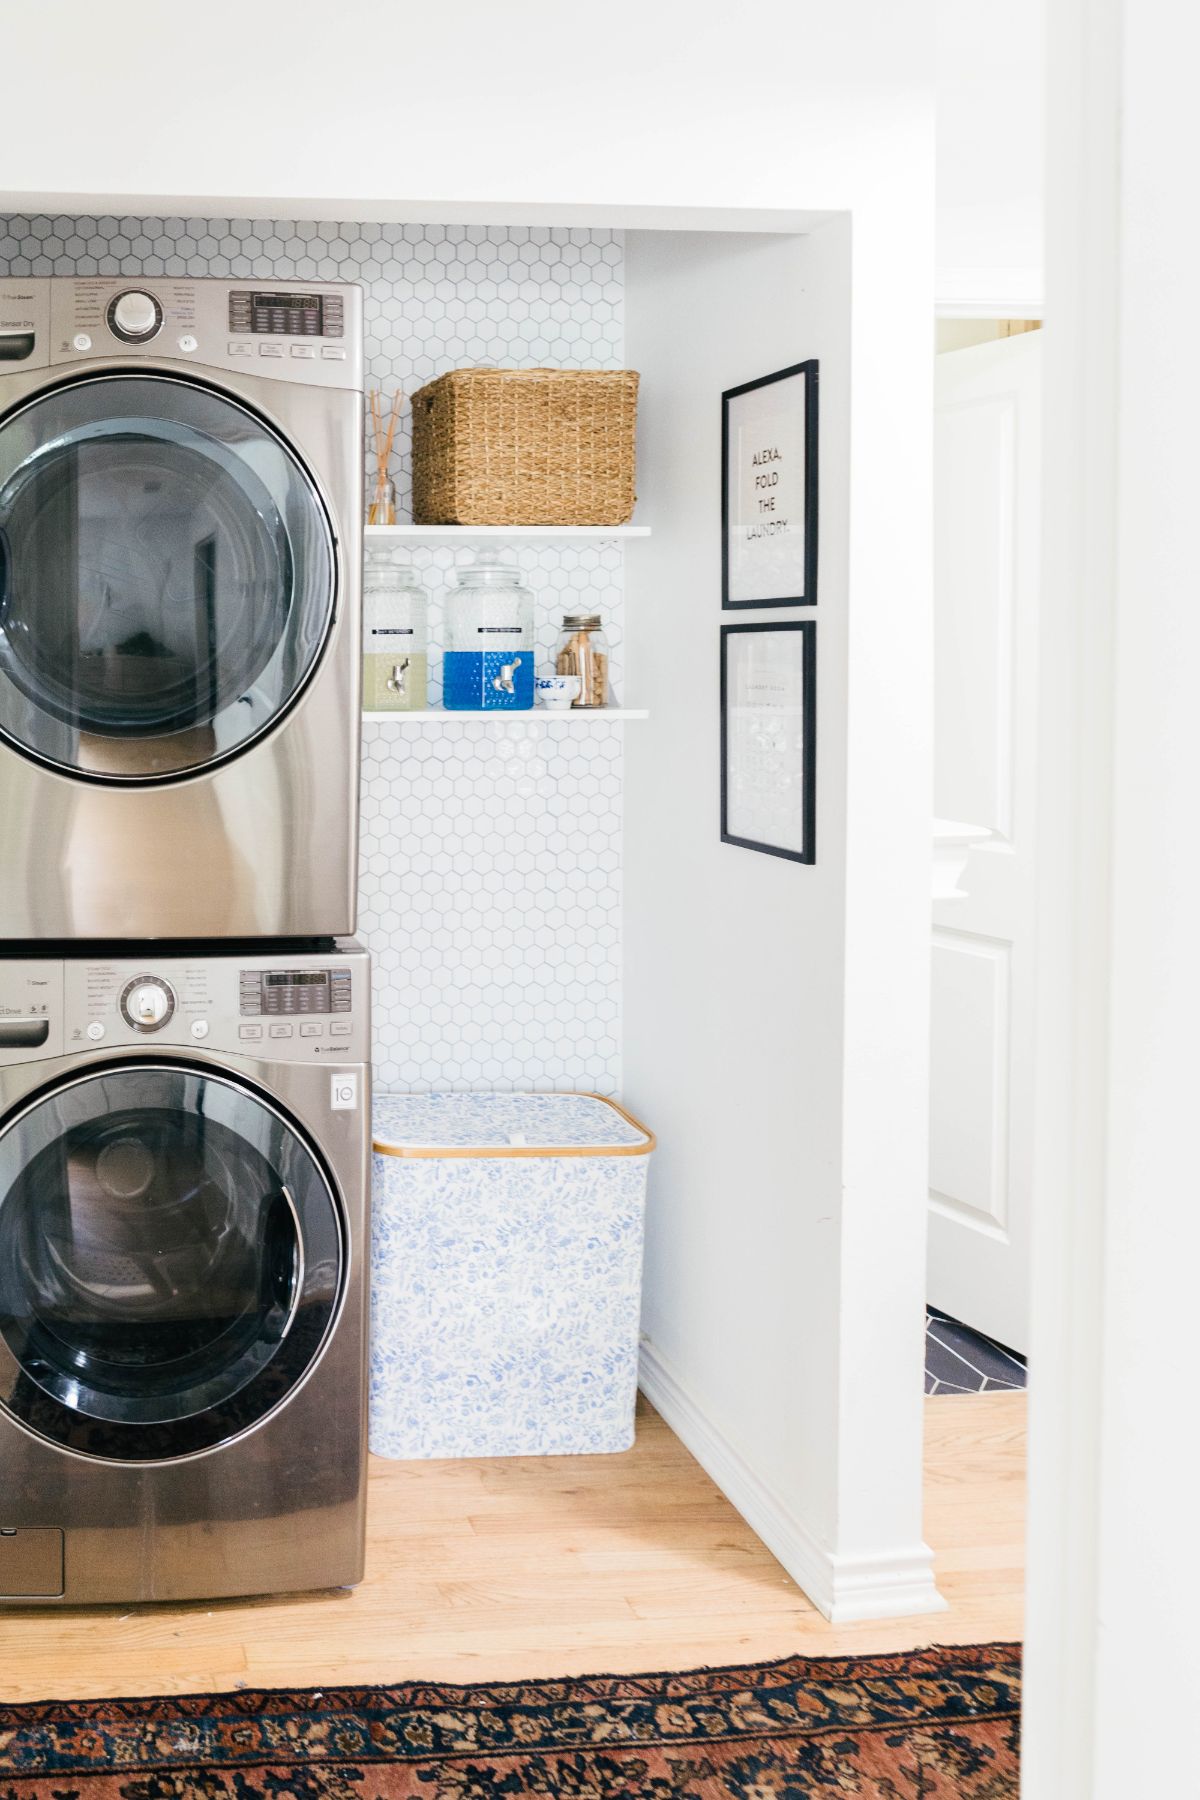 DIY Laundry Room Shelving - Get this farmhouse look